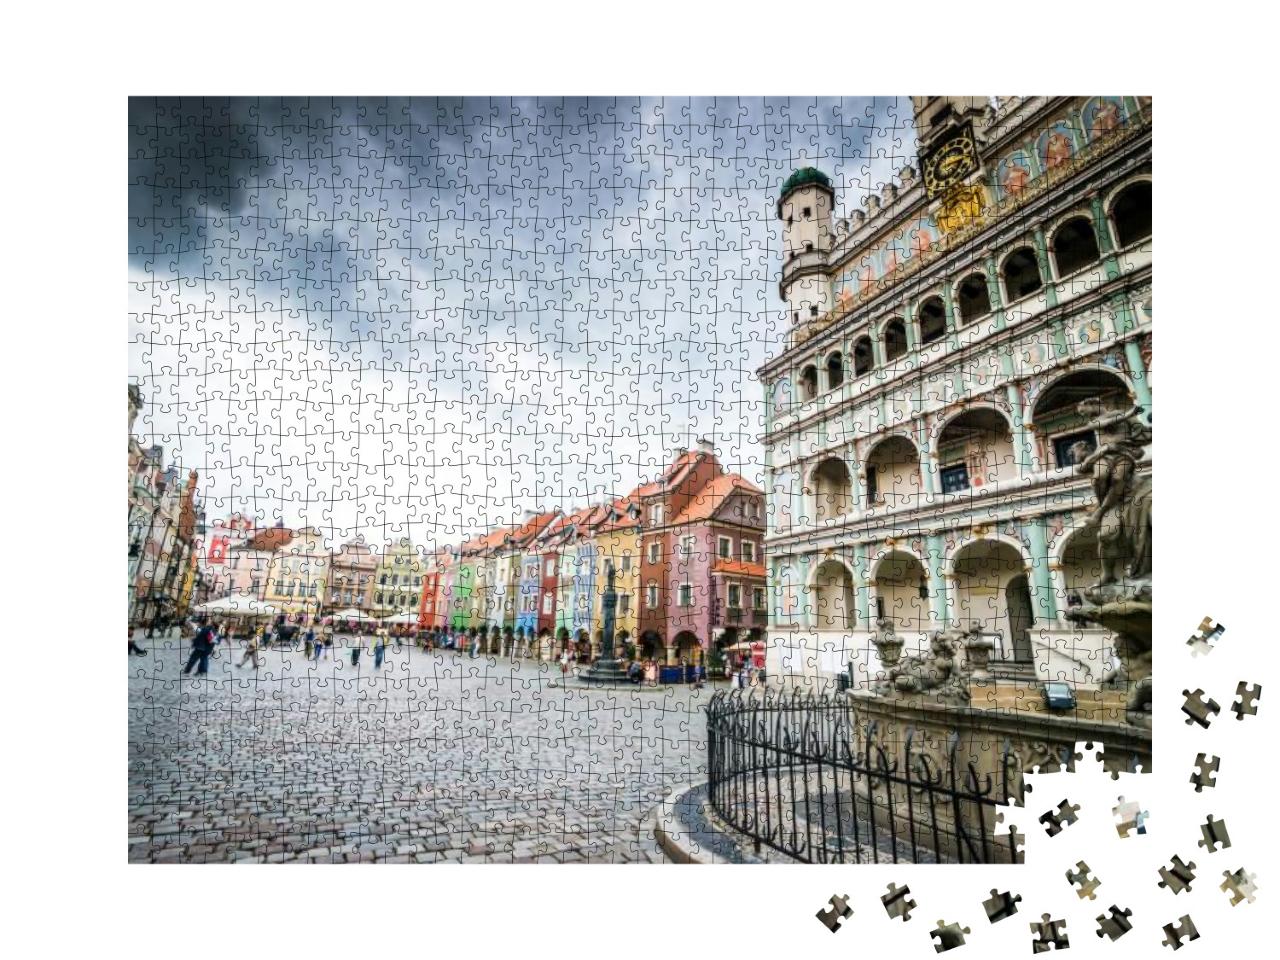 Central Market Square in Poznan, Poland... Jigsaw Puzzle with 1000 pieces